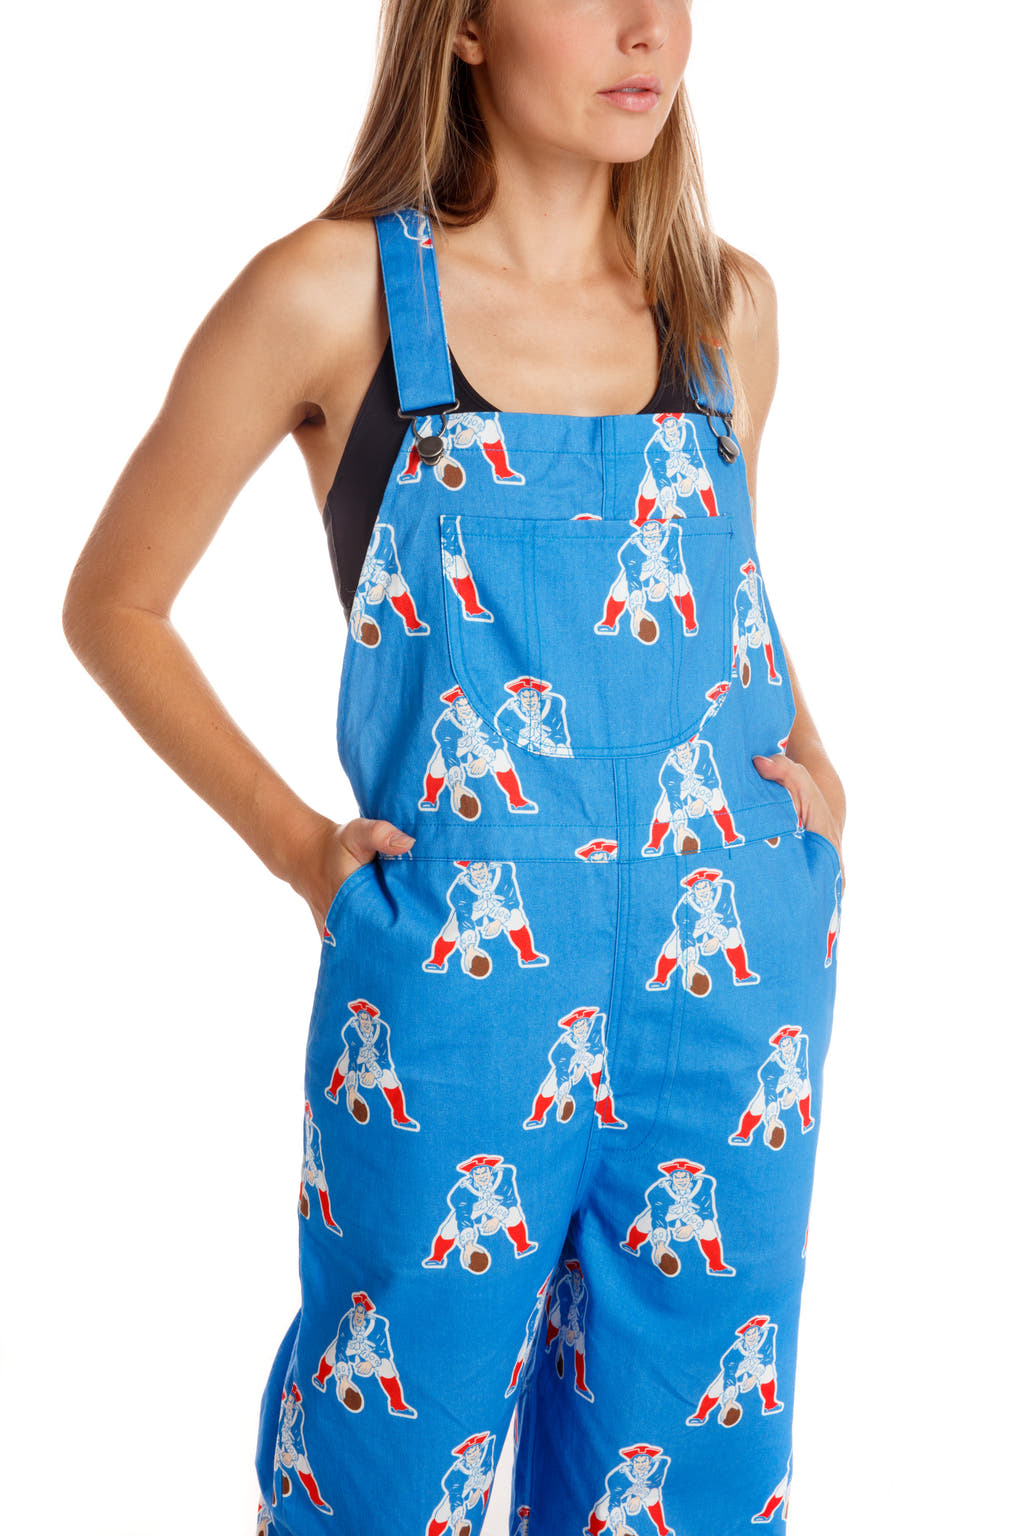 New England Patriots Overalls for Women